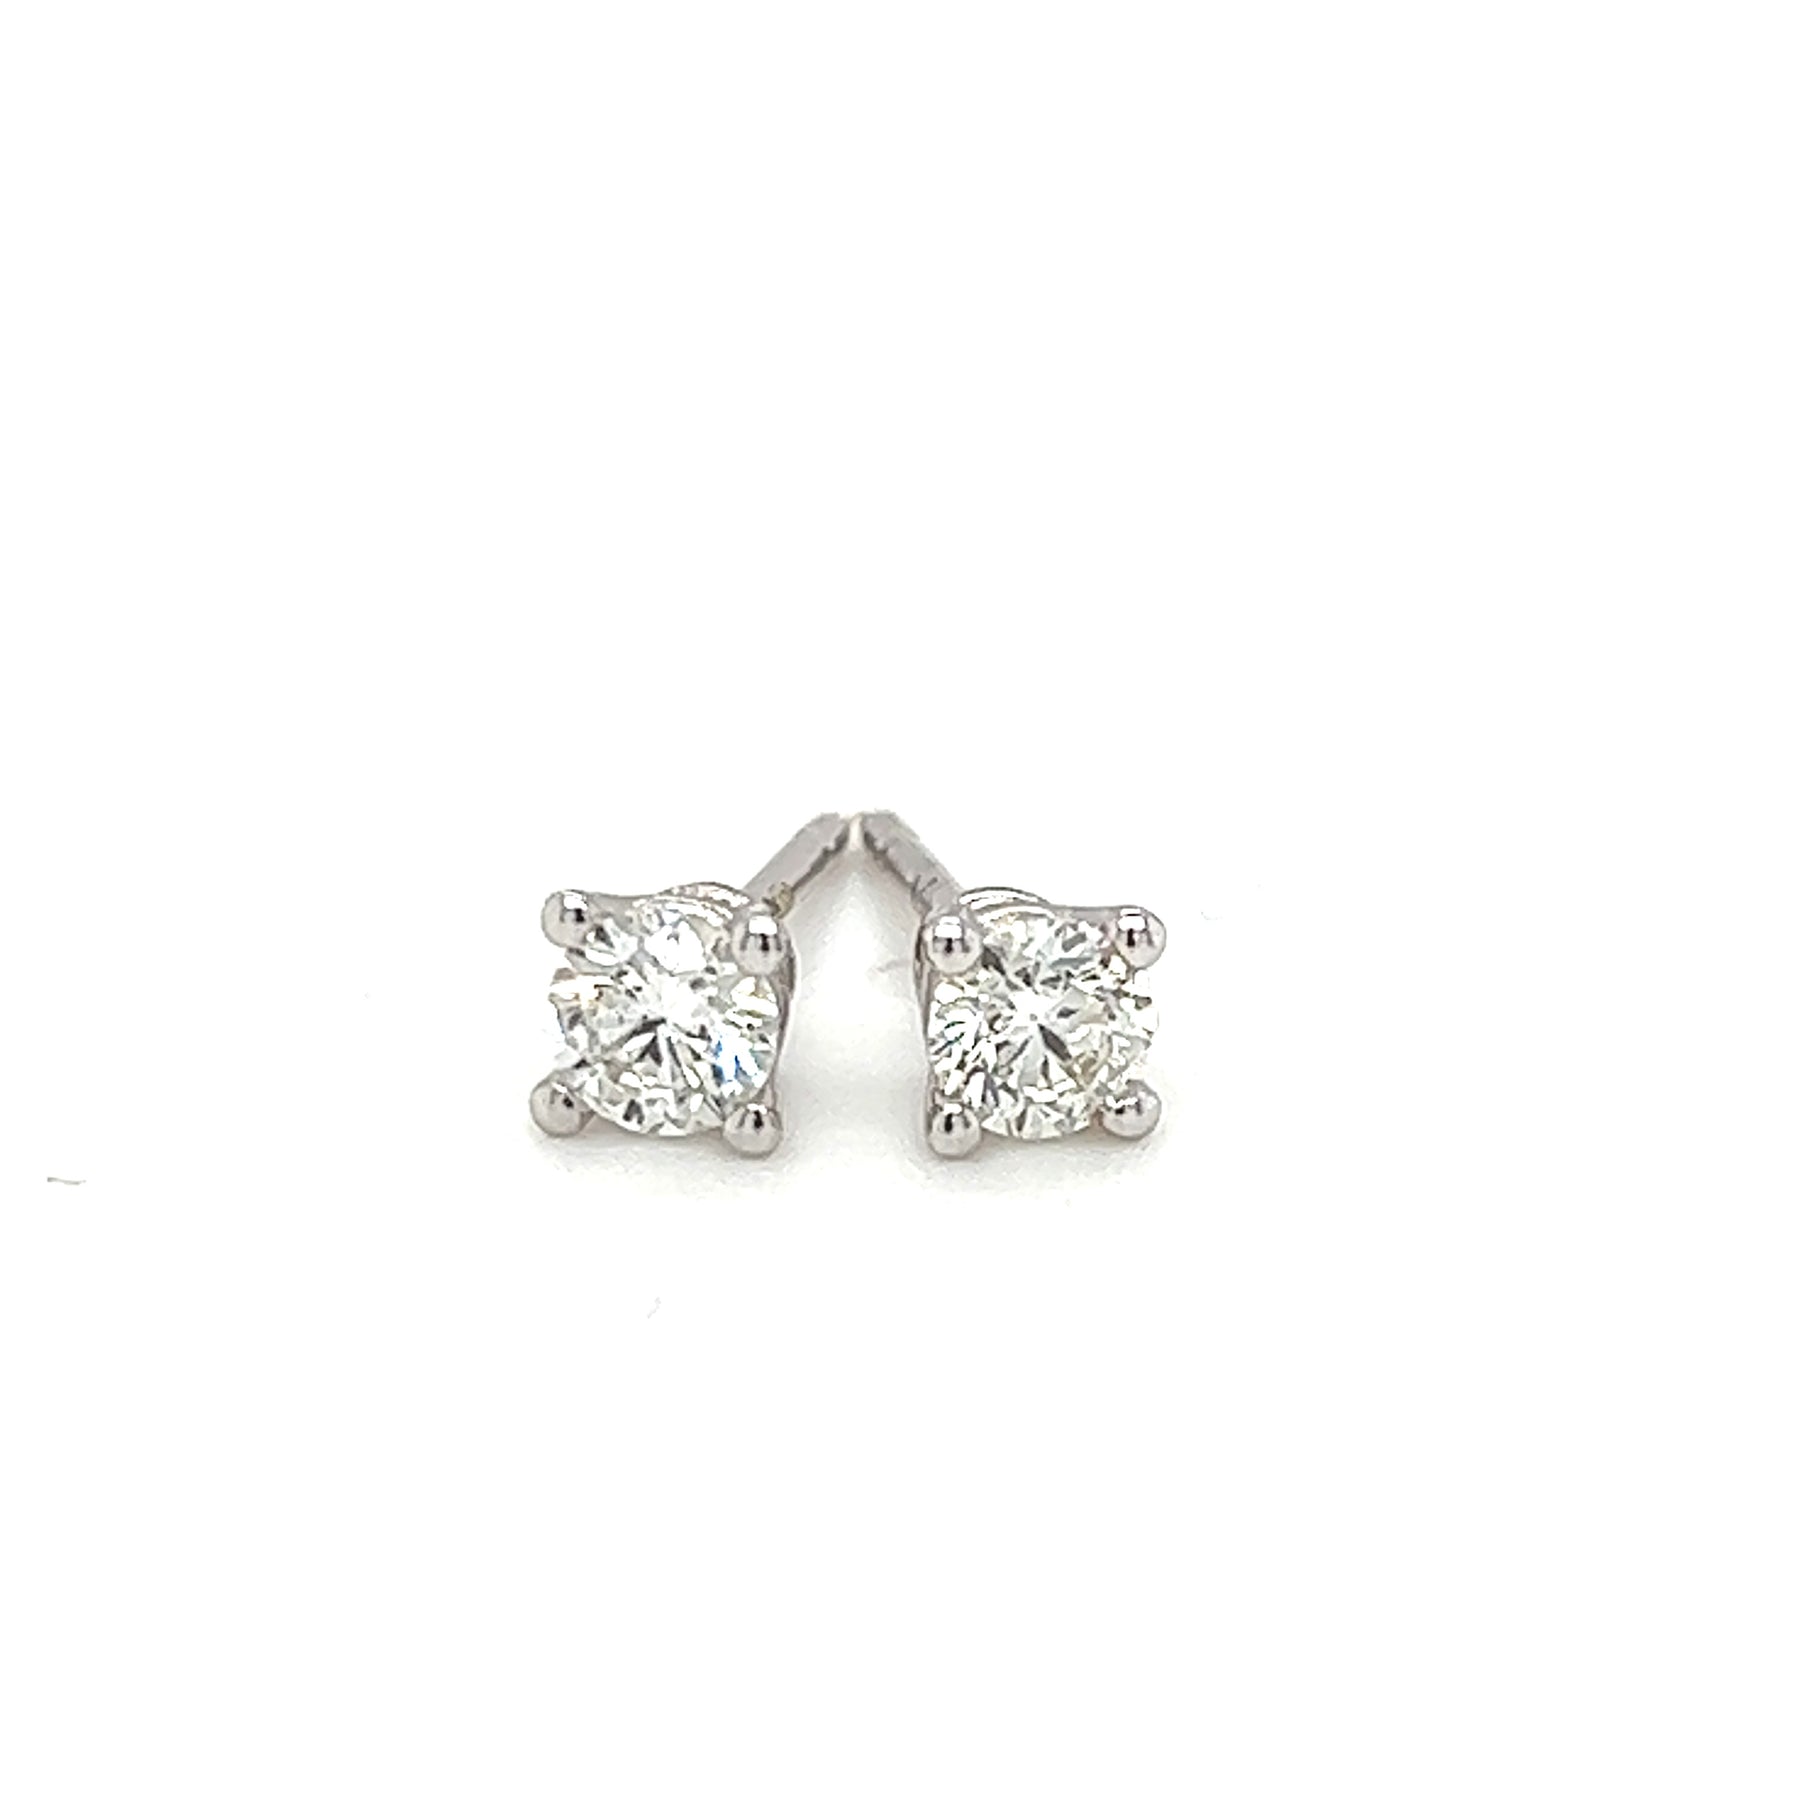 9ct white gold round brilliant 4 claw certified diamond stud earring 0.50ct weight